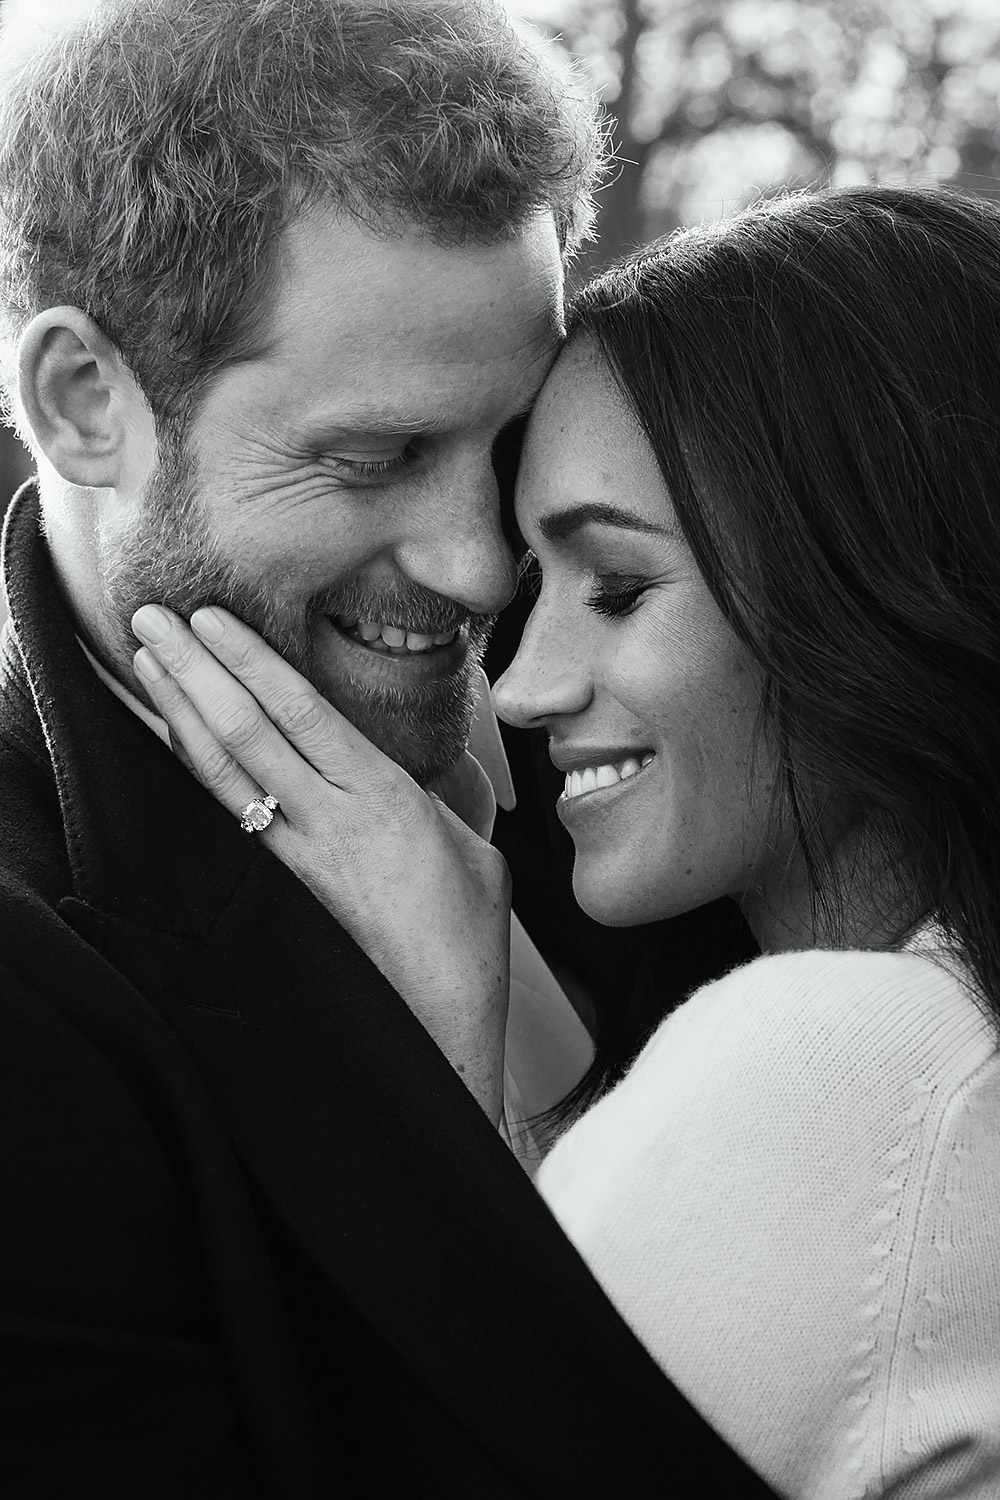 Prince Harry and Meghan Markle official engagement photos, Frogmore House, Windsor, UK - 21 Dec 2017